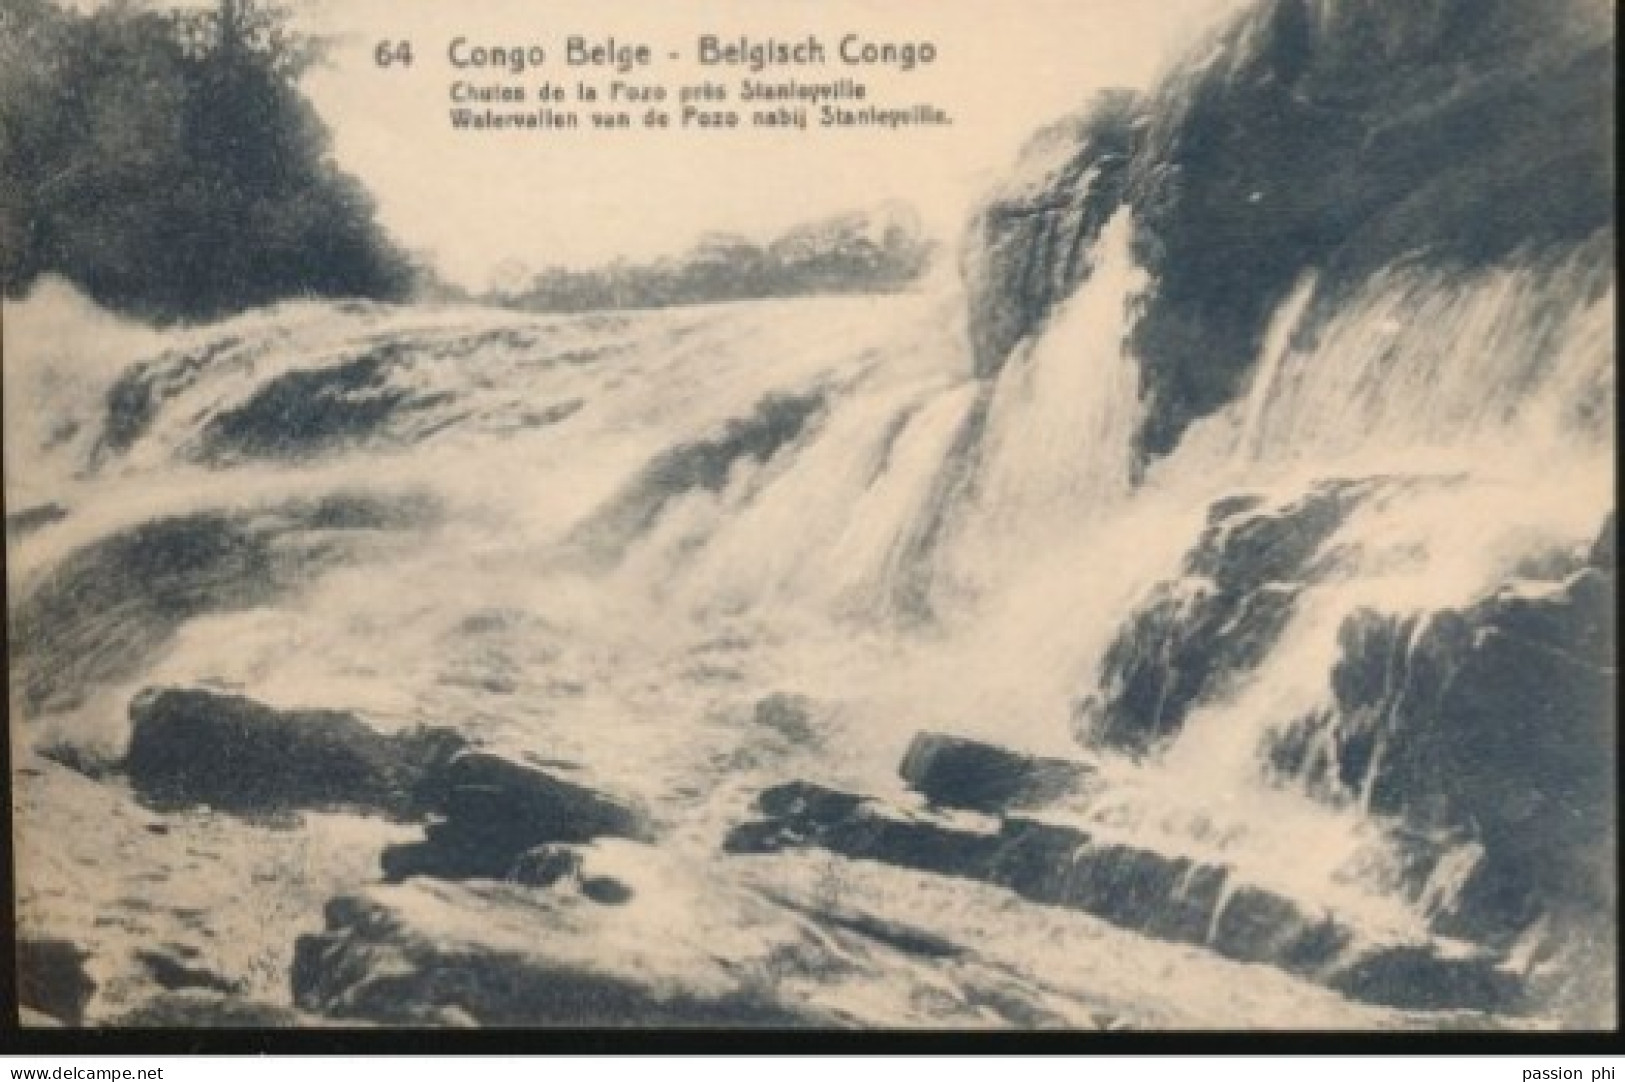 ZAC BELGIAN CONGO  PPS SBEP 52 VIEW 64 UNUSED - Stamped Stationery